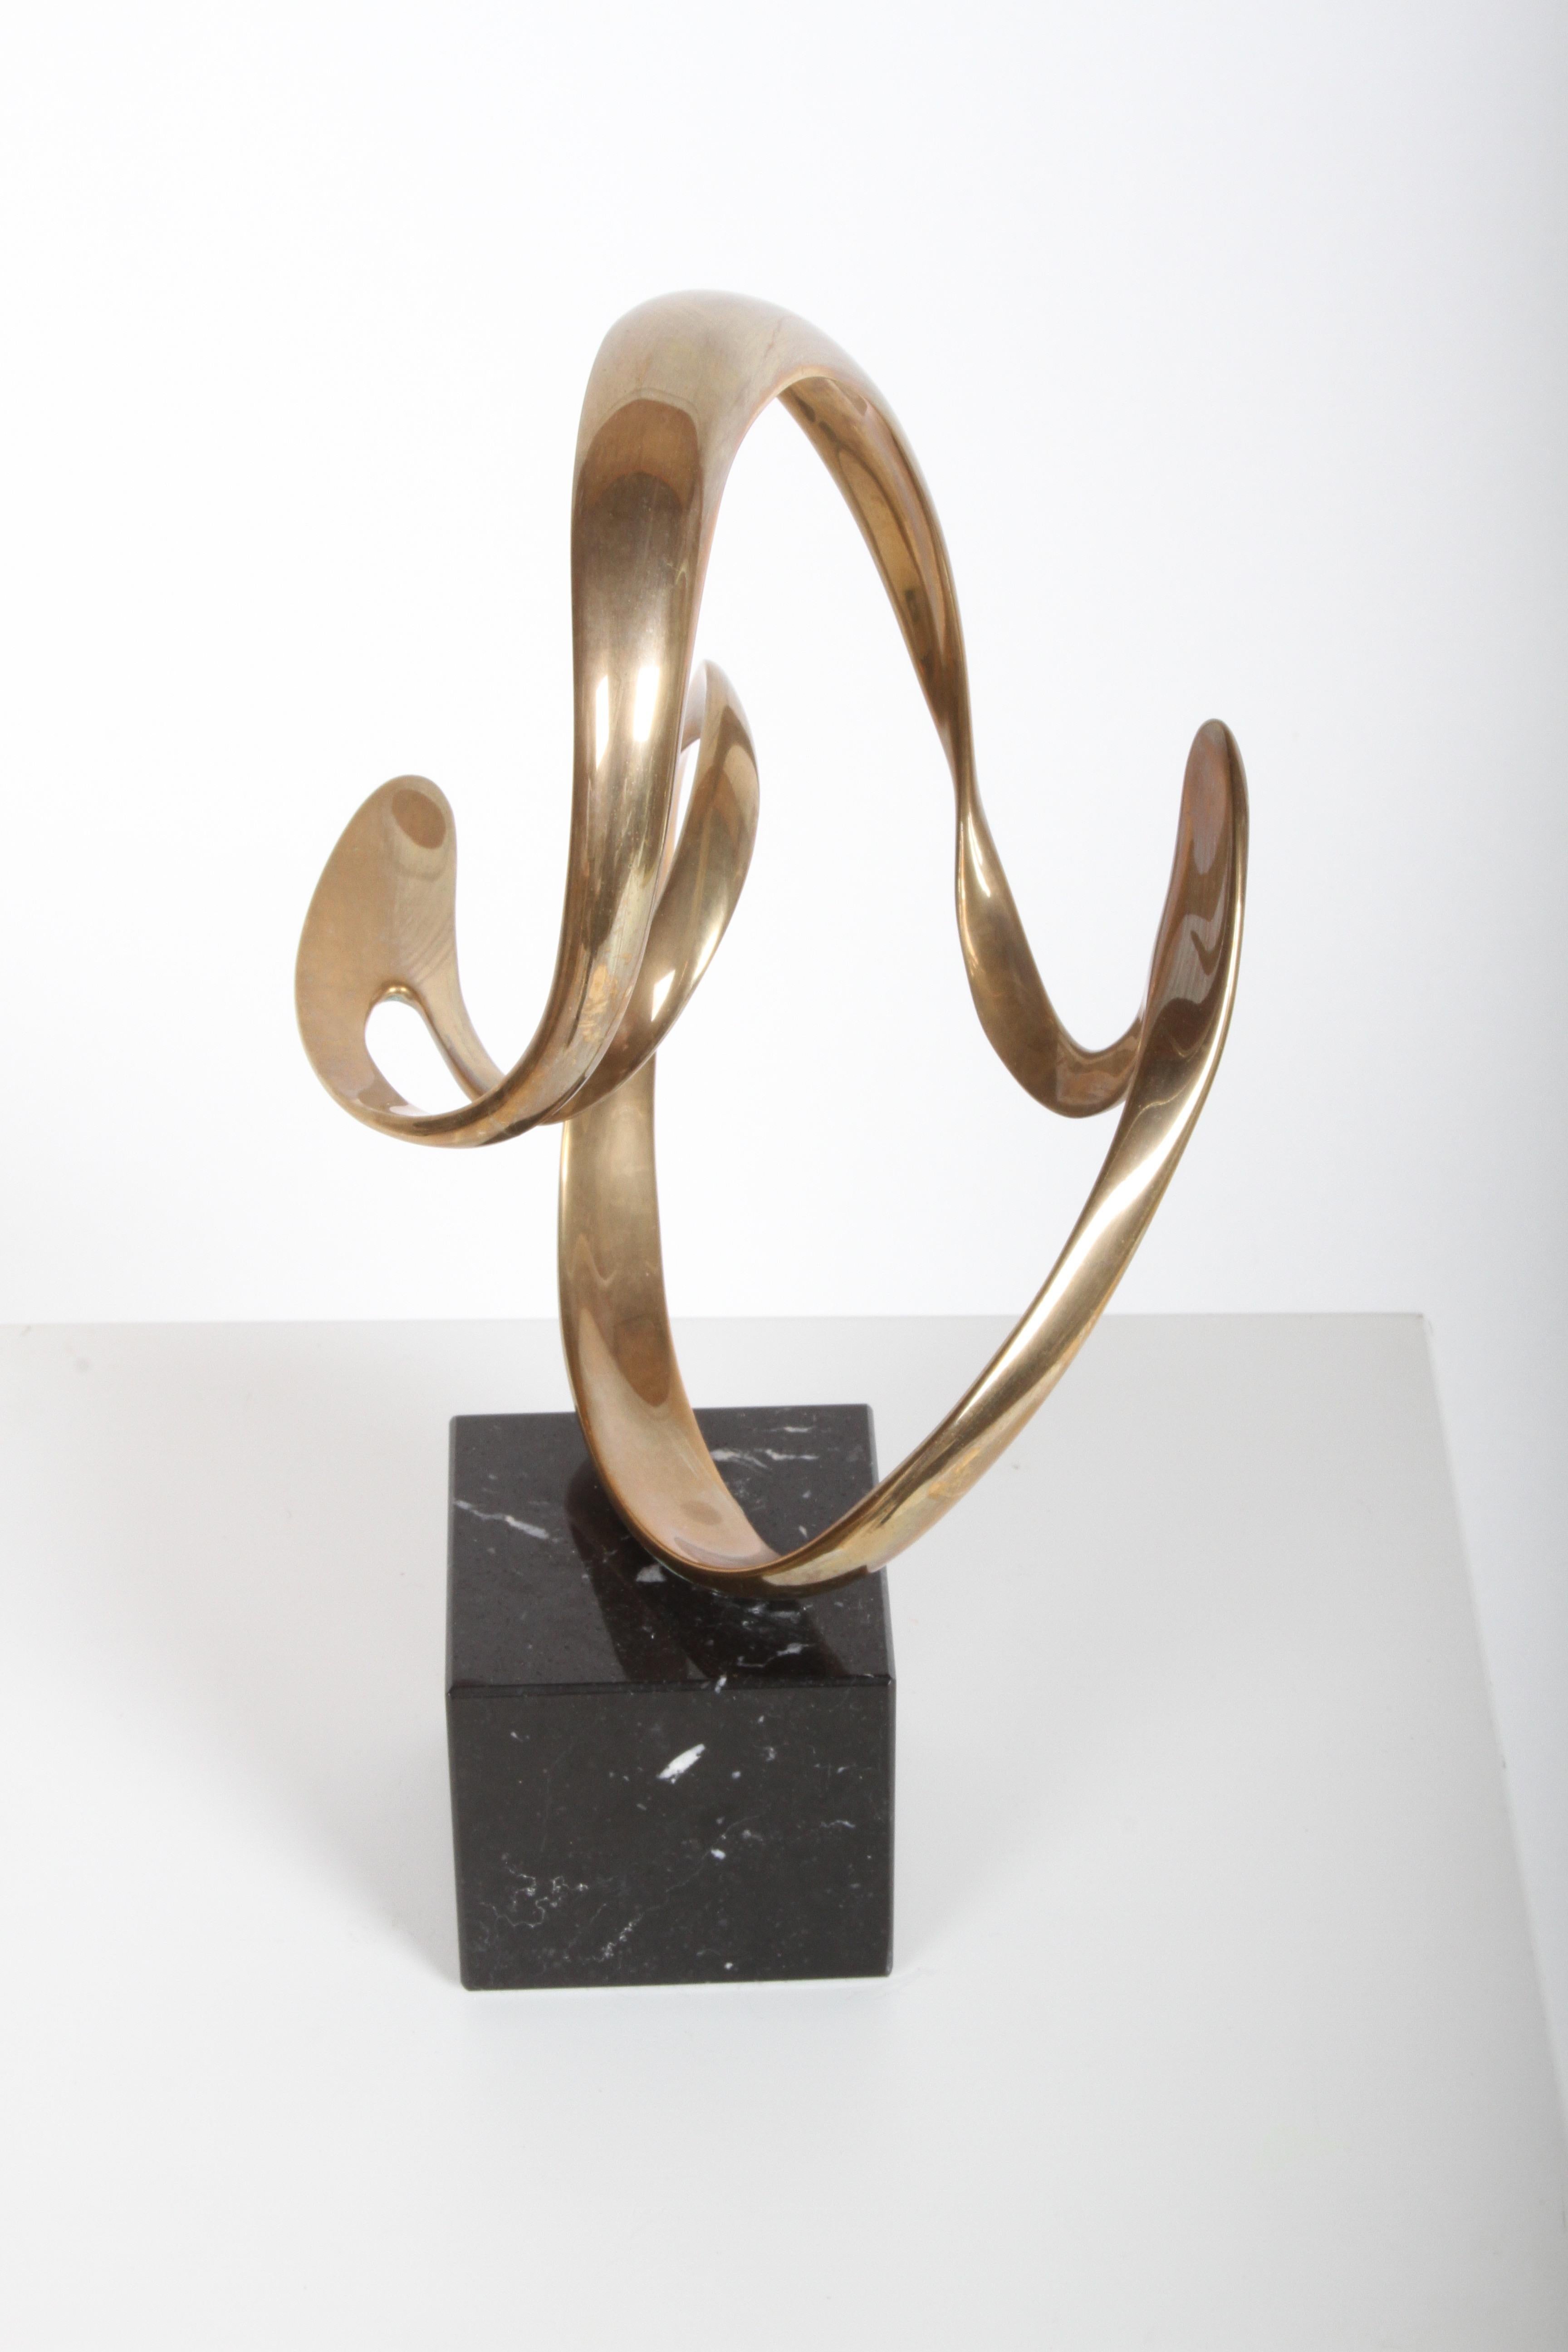 Tom Bennett Signed Bronze Abstract Sculpture, Passages in Time 6